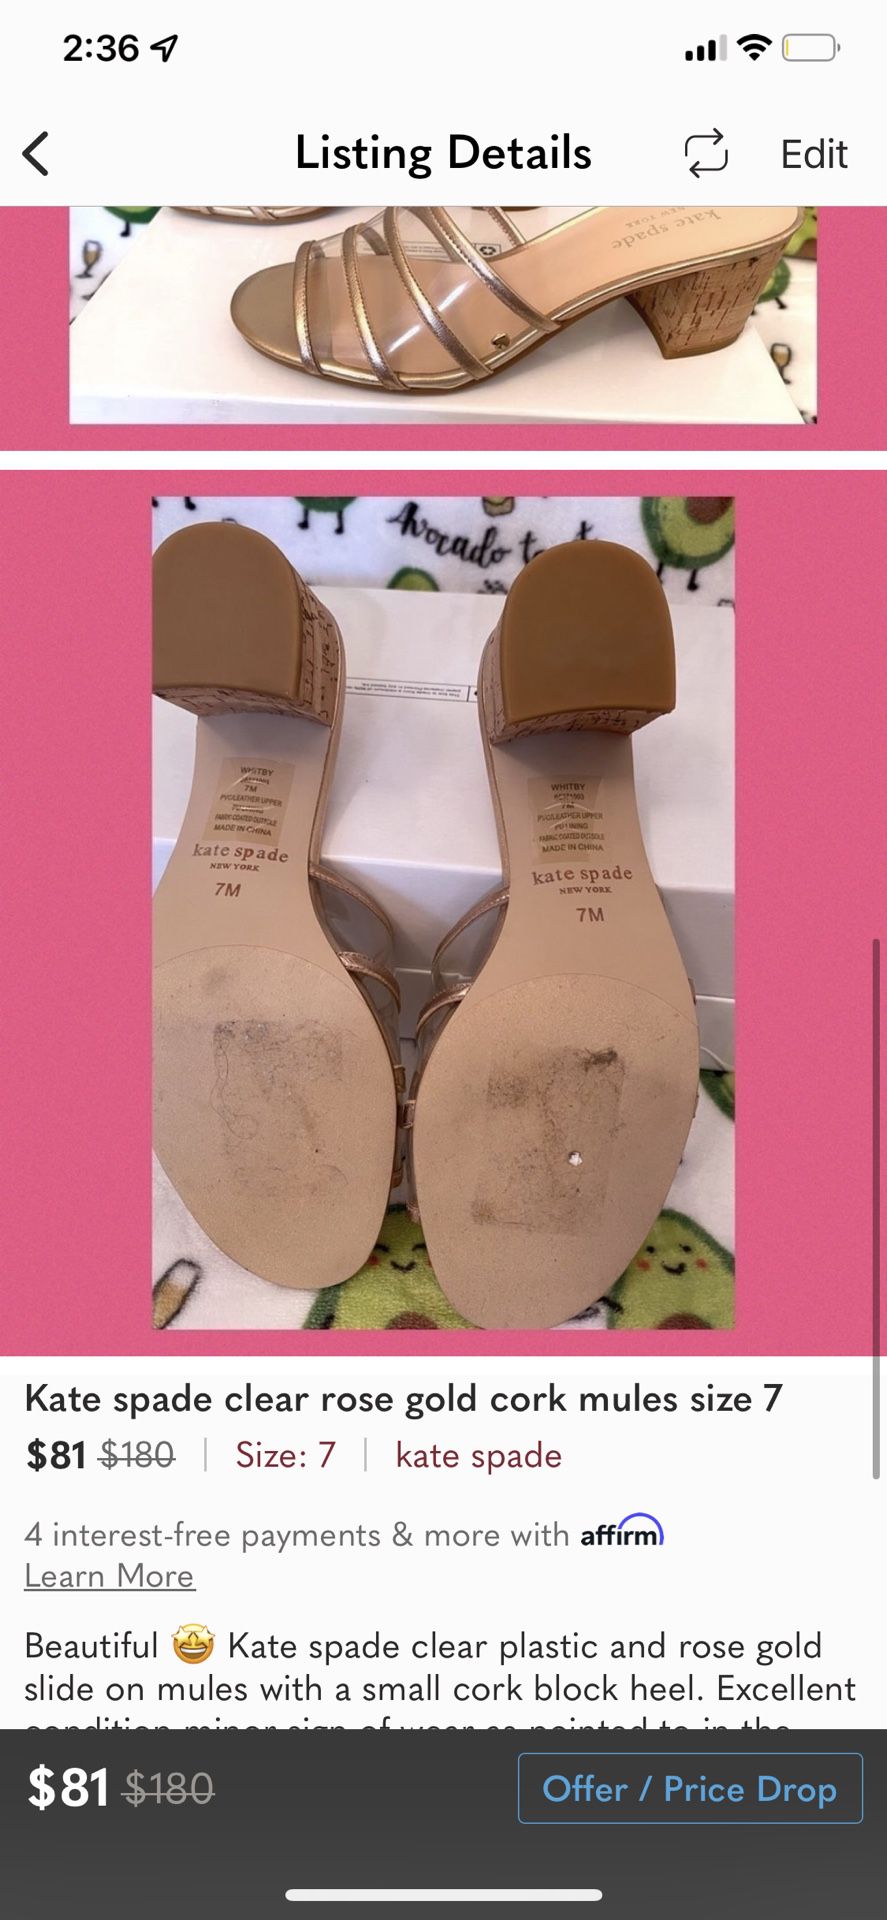 Beautiful Kate spade clear plastic and rose gold slide on mules with a  small cork block heel for Sale in Tacoma, WA - OfferUp